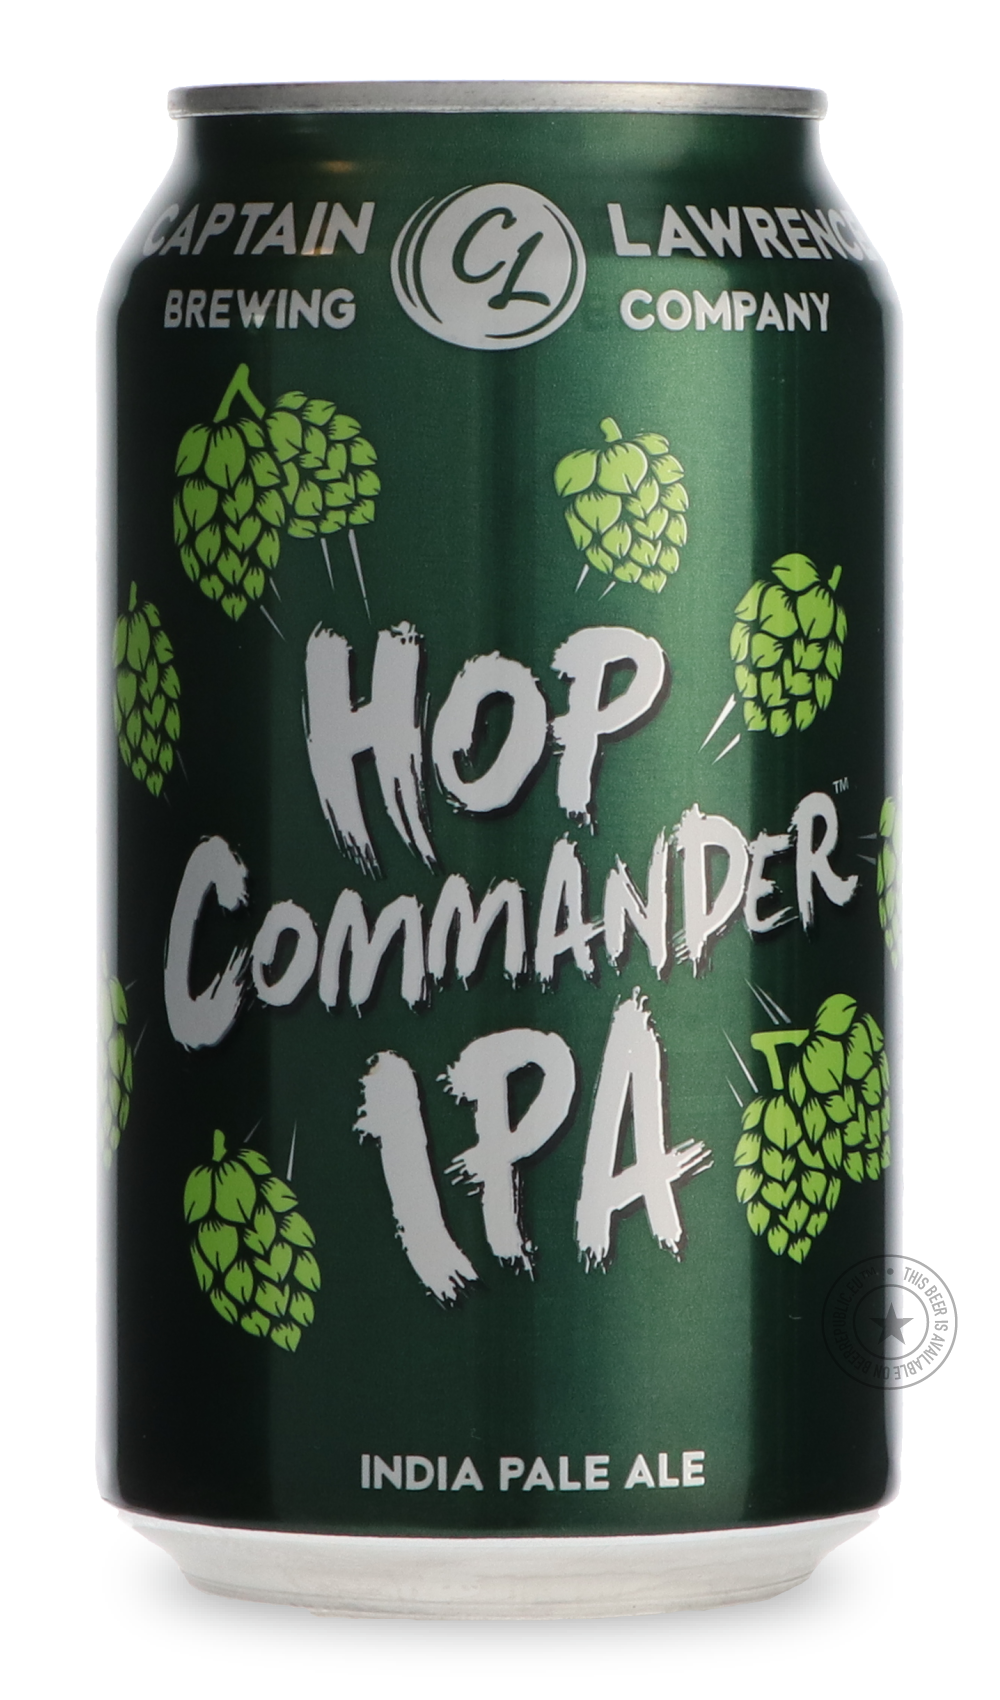 http://beerrepublic.eu/cdn/shop/products/Find-and-buy-Captain-Lawrence-Hop-Commander-at-Beer-Republic_-Europes-no_1-store-for-the-best-craft-beer-from-America-United-States-Russia-New-Zealand-Canada-Norway-Estonia-The-Nether_96972267-2c45-4080-bdce-3f01f85c9f51.png?v=1696388854